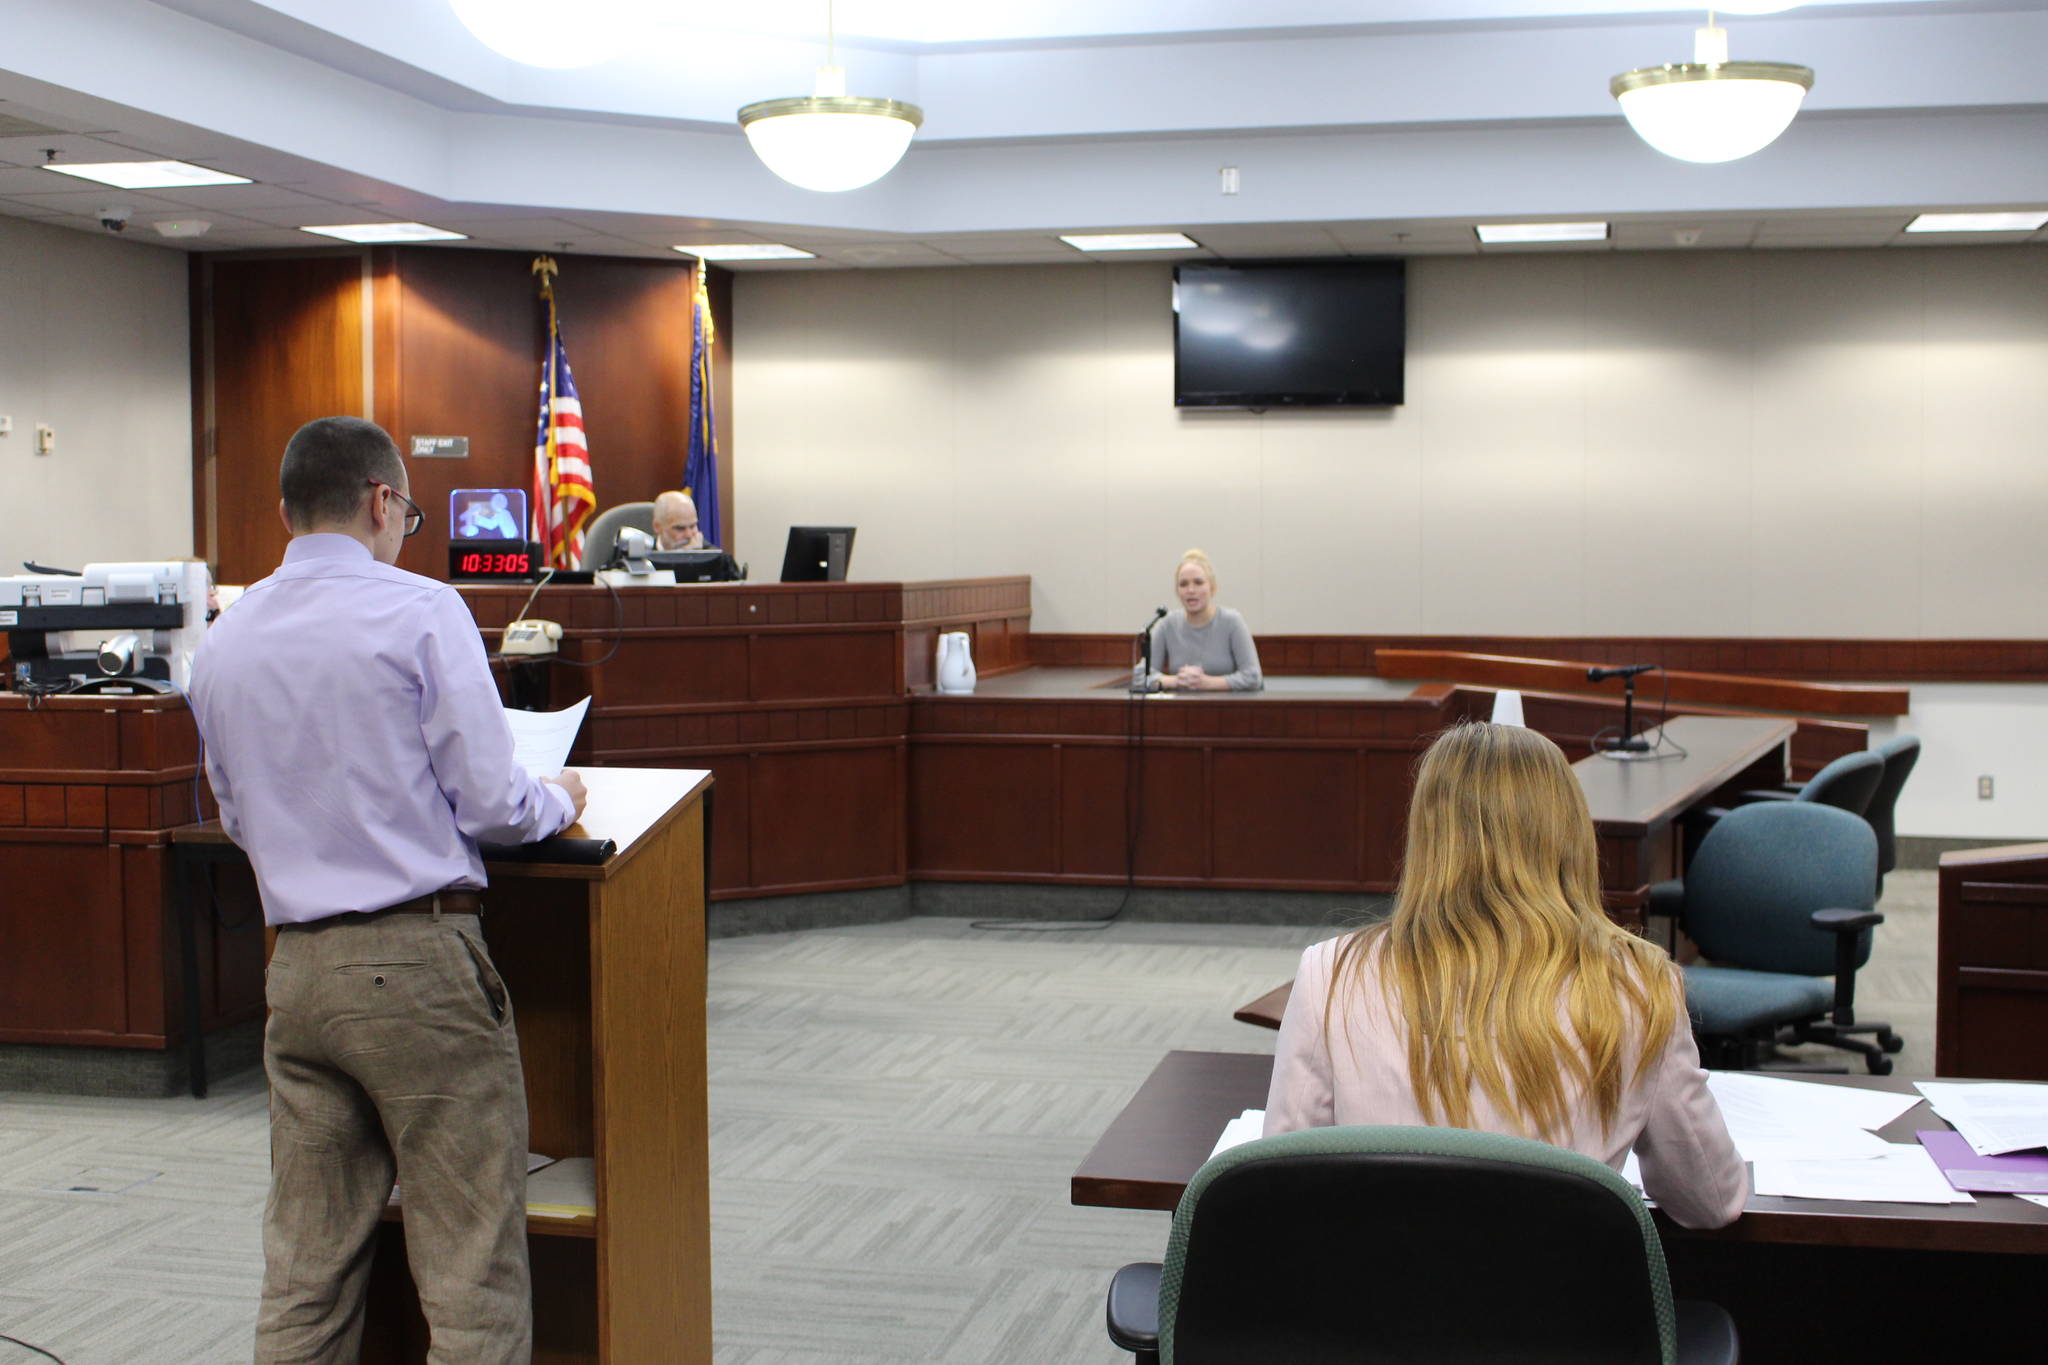 Nikiski Middle/High School senior Joseph Yourkoski, in his role as prosecutor, questions witness Cecily Quiner during a mock trial at the Kenai Courthouse on Dec. 3, 2019. (Photo by Brian Mazurek/Peninsula Clarion)